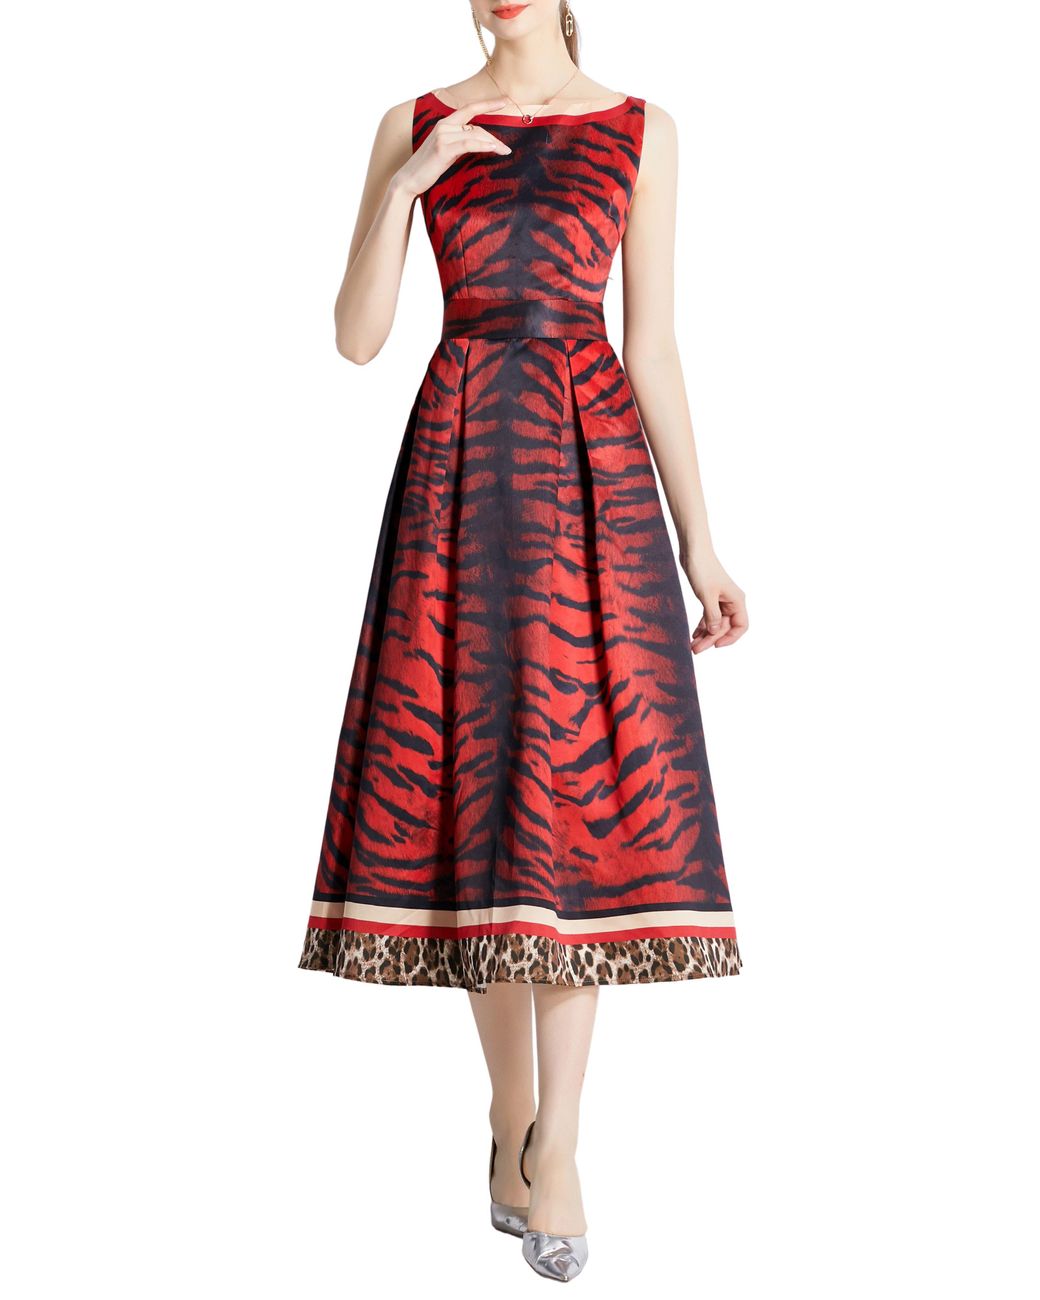 Kaimilan Mix Print Fit & Flare Dress in Red | Lyst